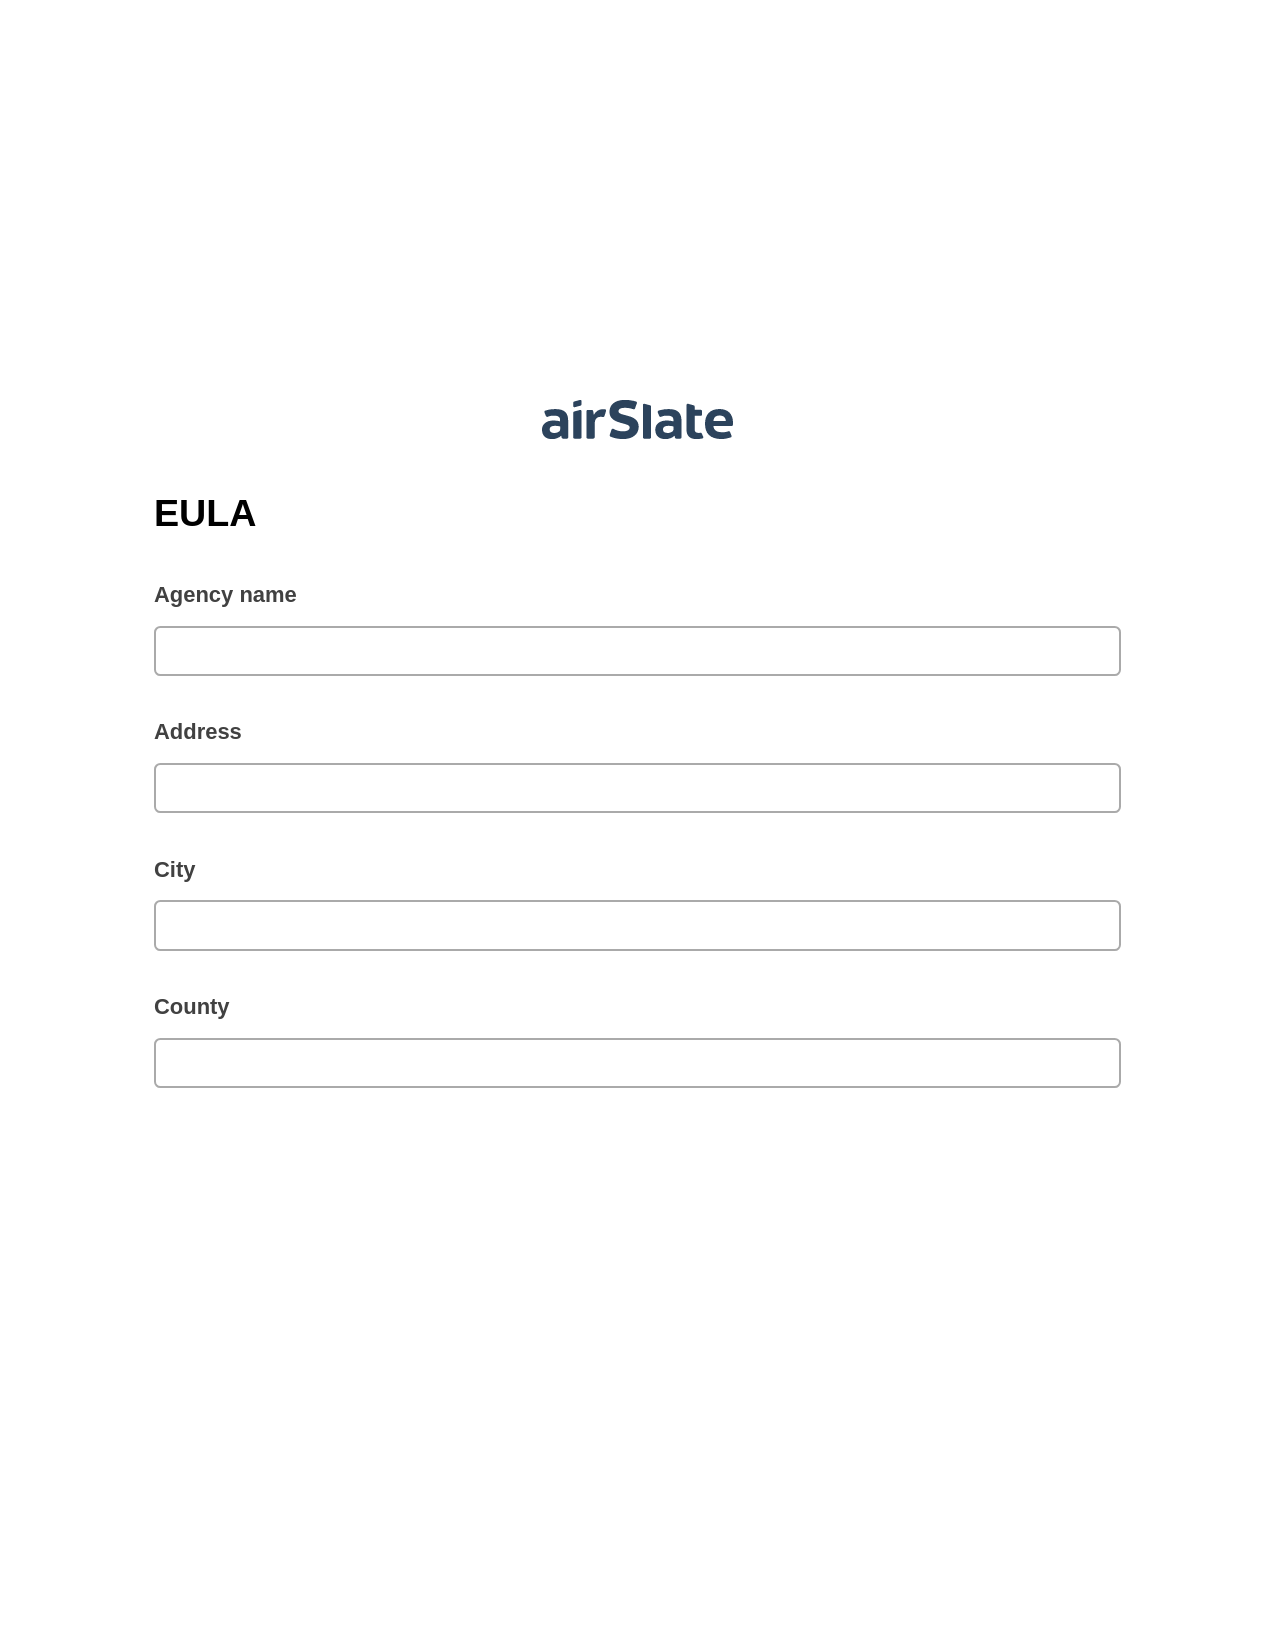 EULA Pre-fill from Salesforce Records with SOQL Bot, Update Salesforce Record Bot, Export to Google Sheet Bot